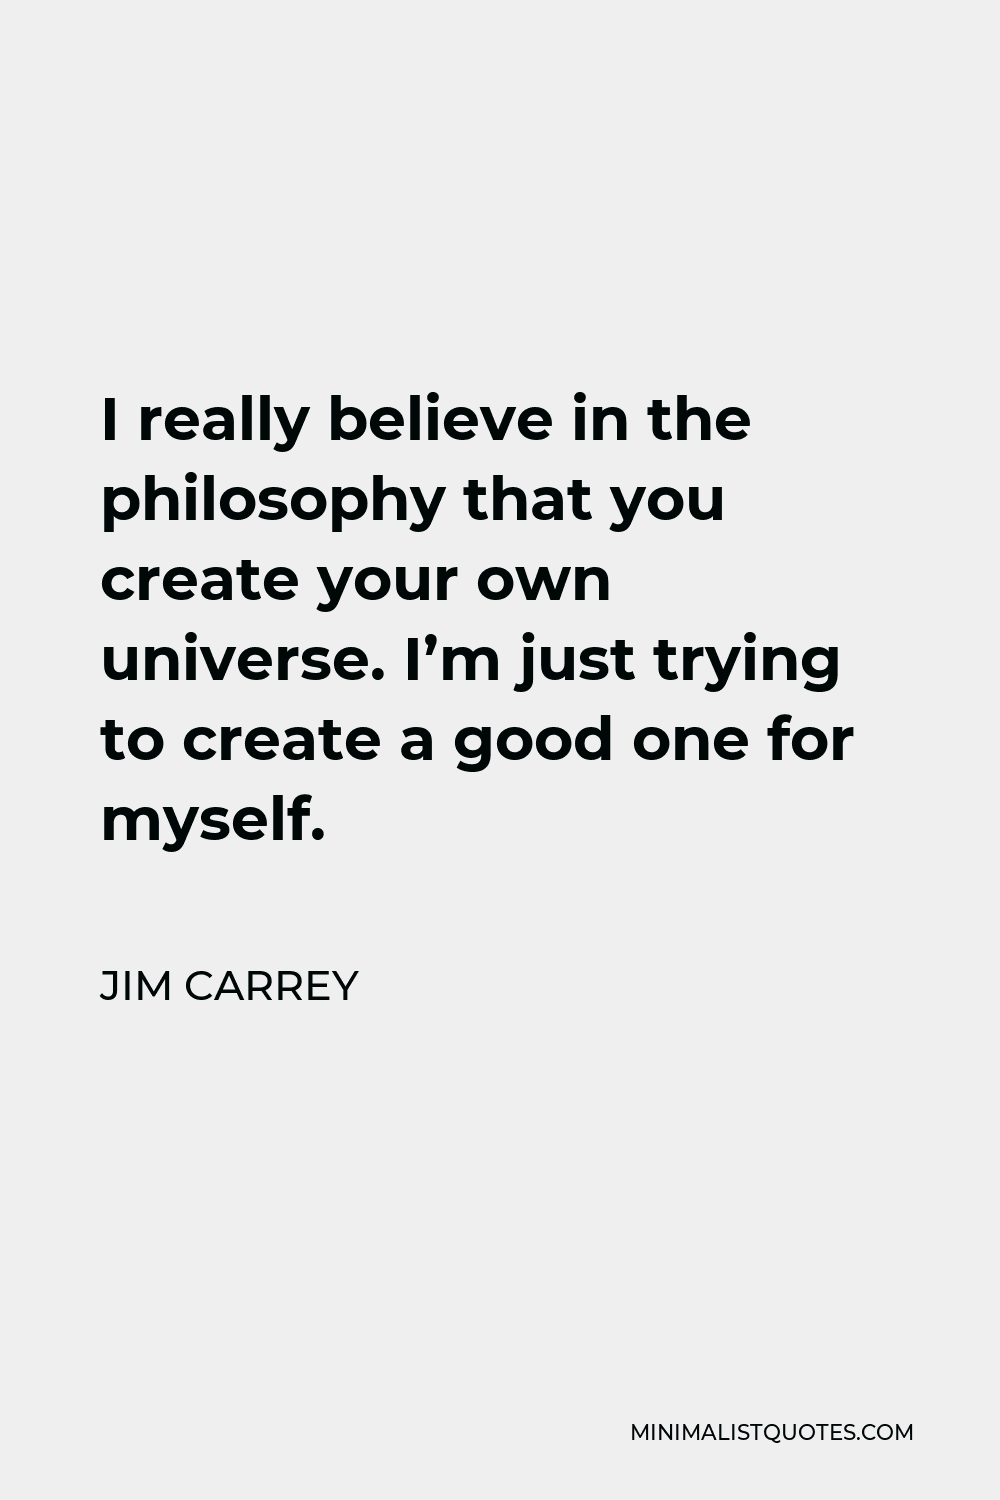 Jim Carrey Quote - I really believe in the philosophy that you create your own universe. I’m just trying to create a good one for myself.